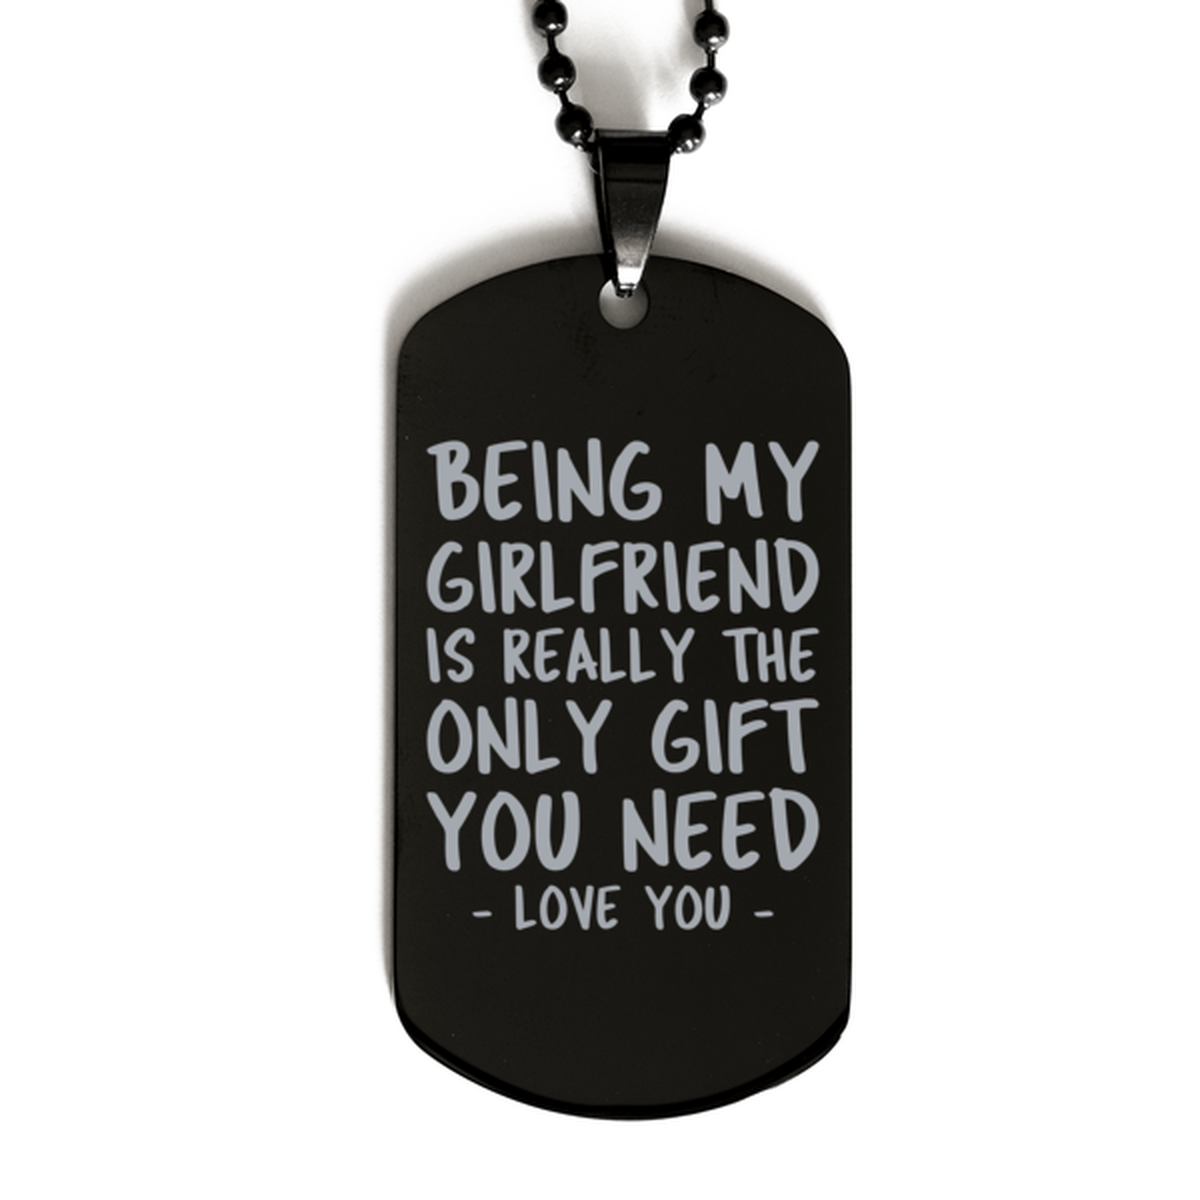 Funny Girlfriend Black Dog Tag Necklace, Being My Girlfriend Is Really the Only Gift You Need, Best Birthday Gifts for Girlfriend